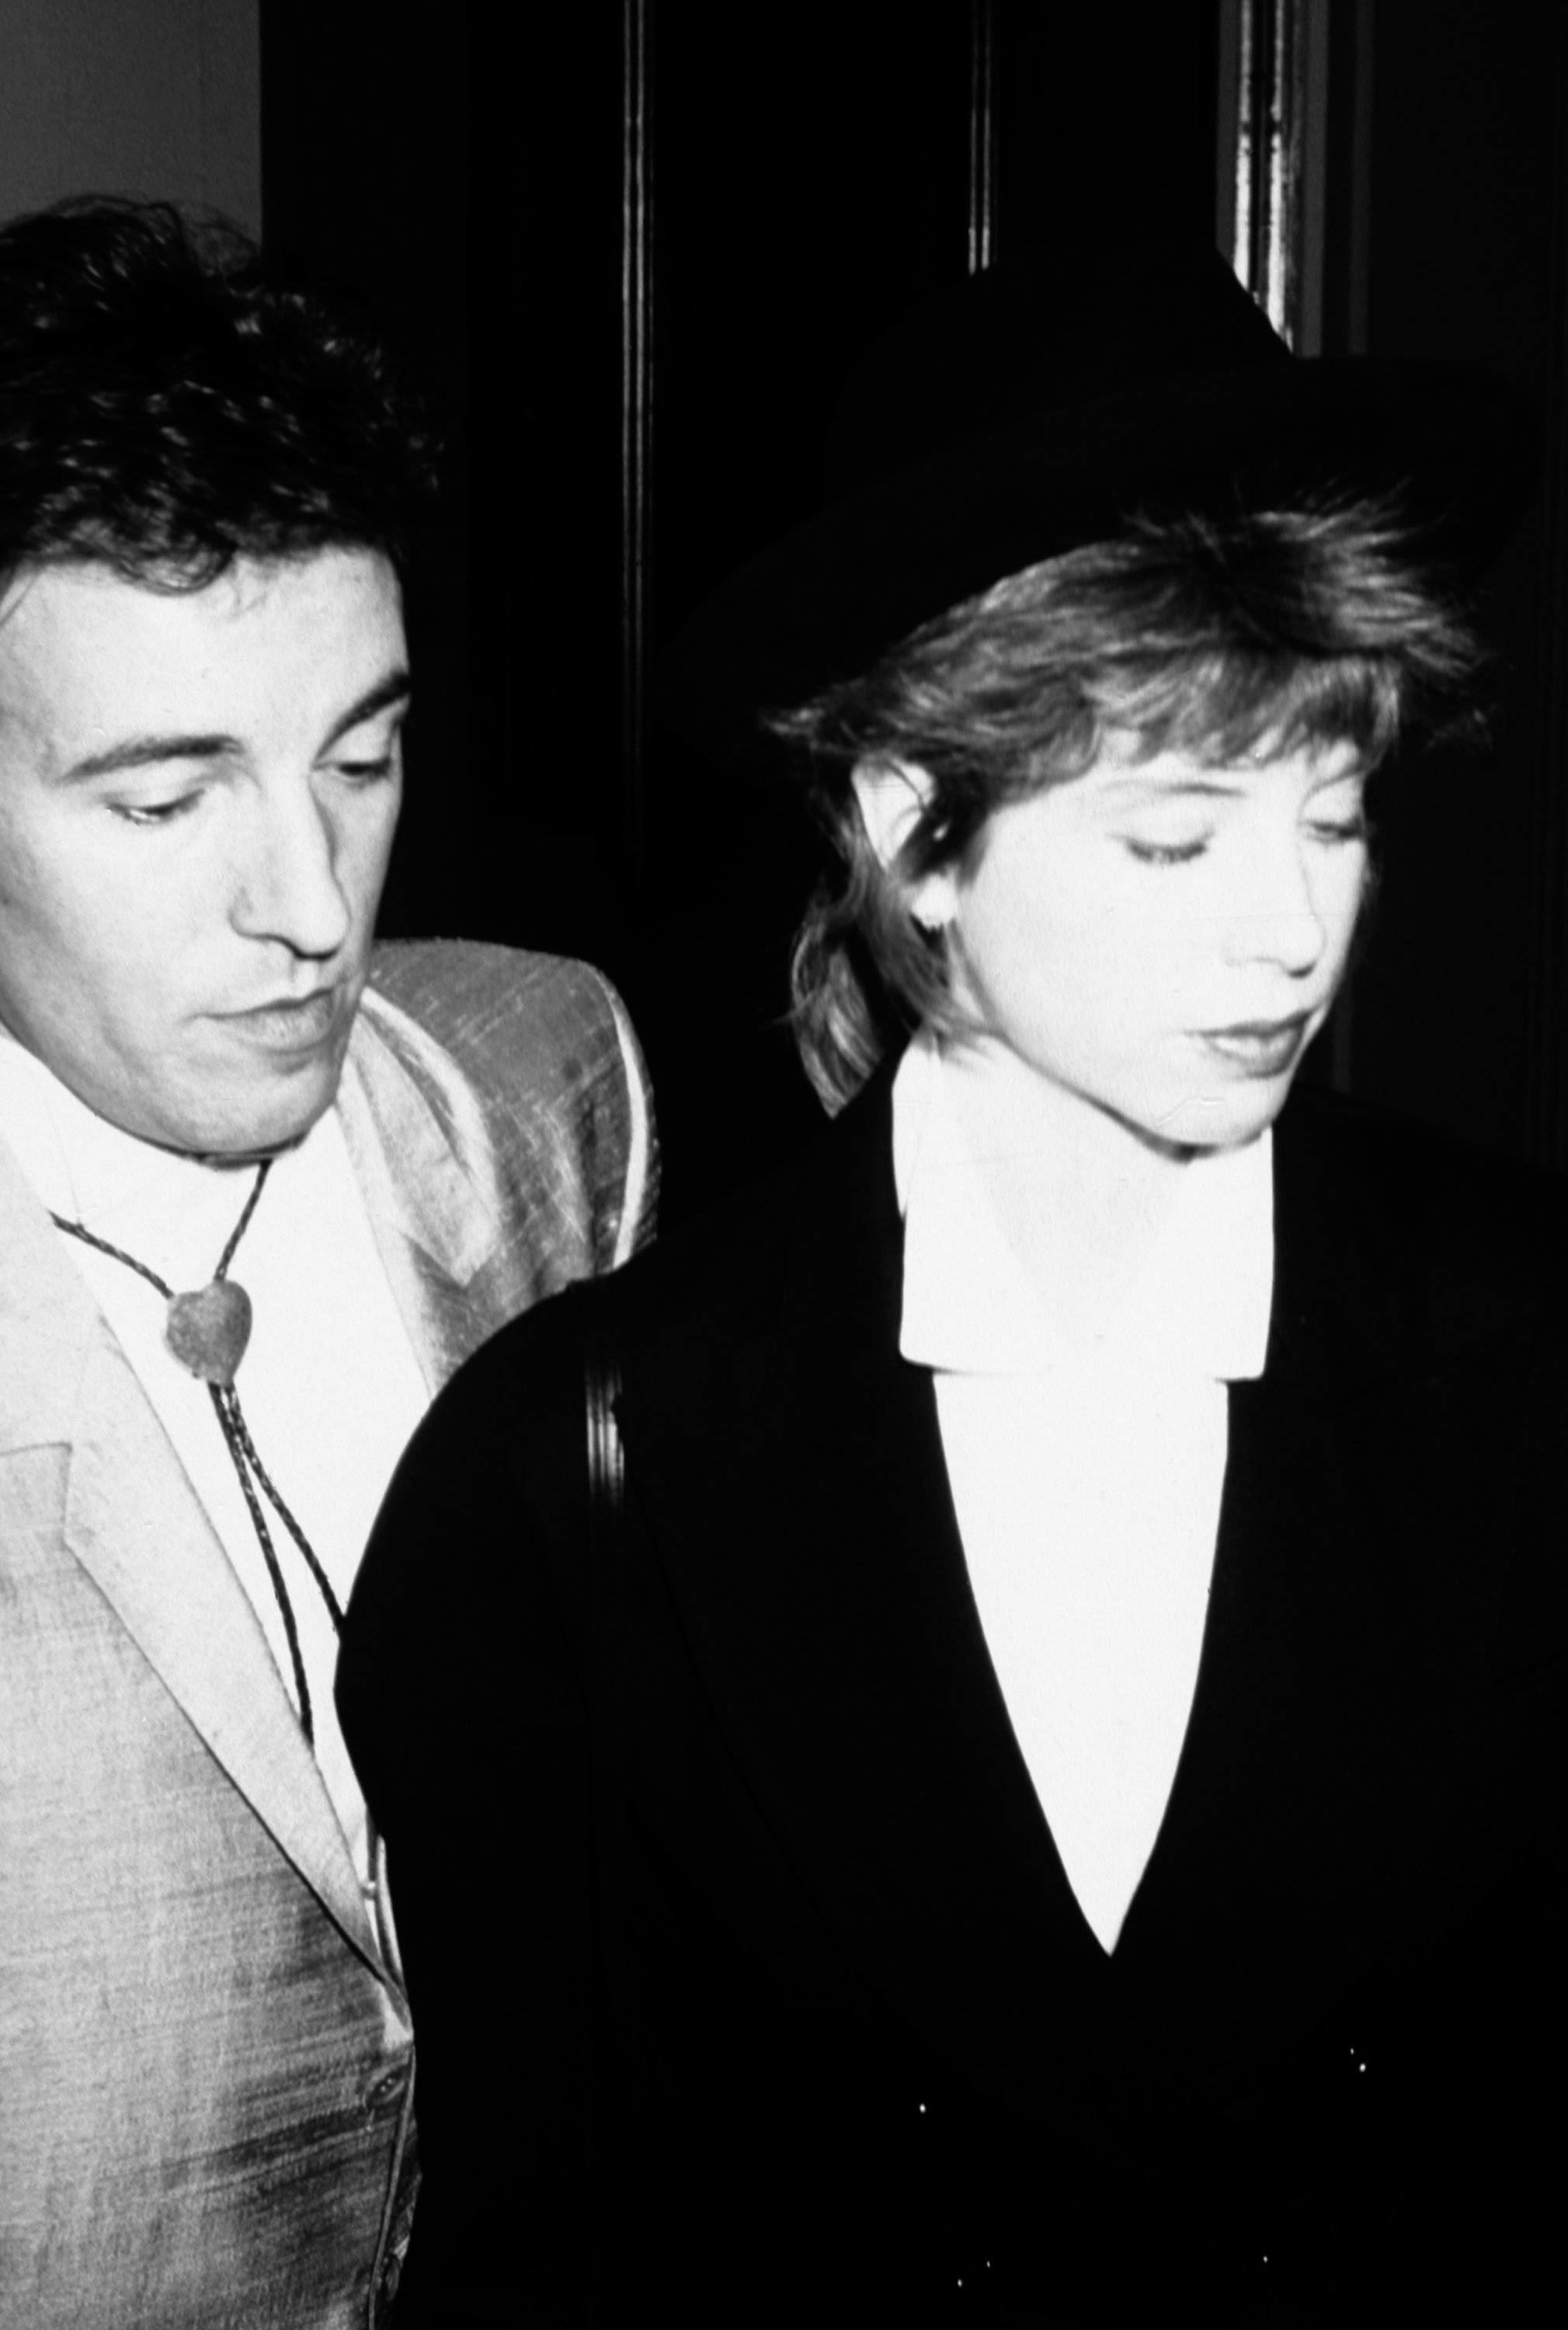 Bruce Springsteen and Julianne Phillips at the Second Annual Rock N Roll Hall of Fame Awards on January 21, 1987, in New York. | Source: Getty Images